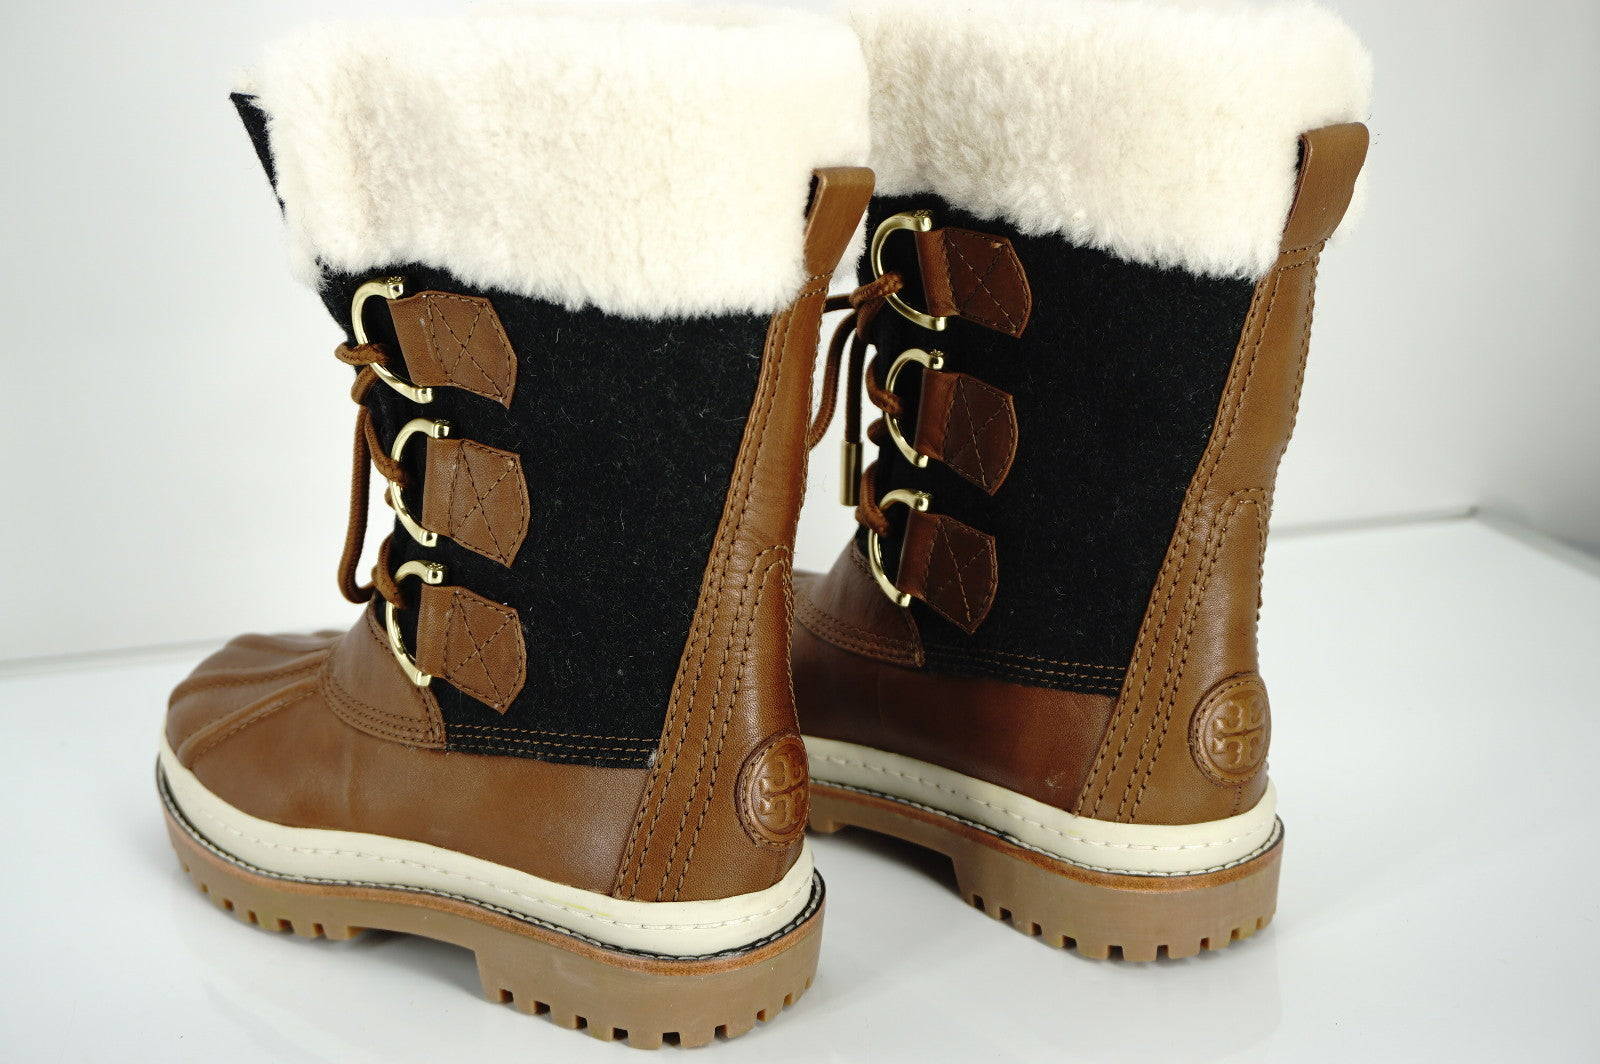 Tory Burch Grey Flannel Brown Leather Duck Boots Size 5 Shearling Trim NIB $295